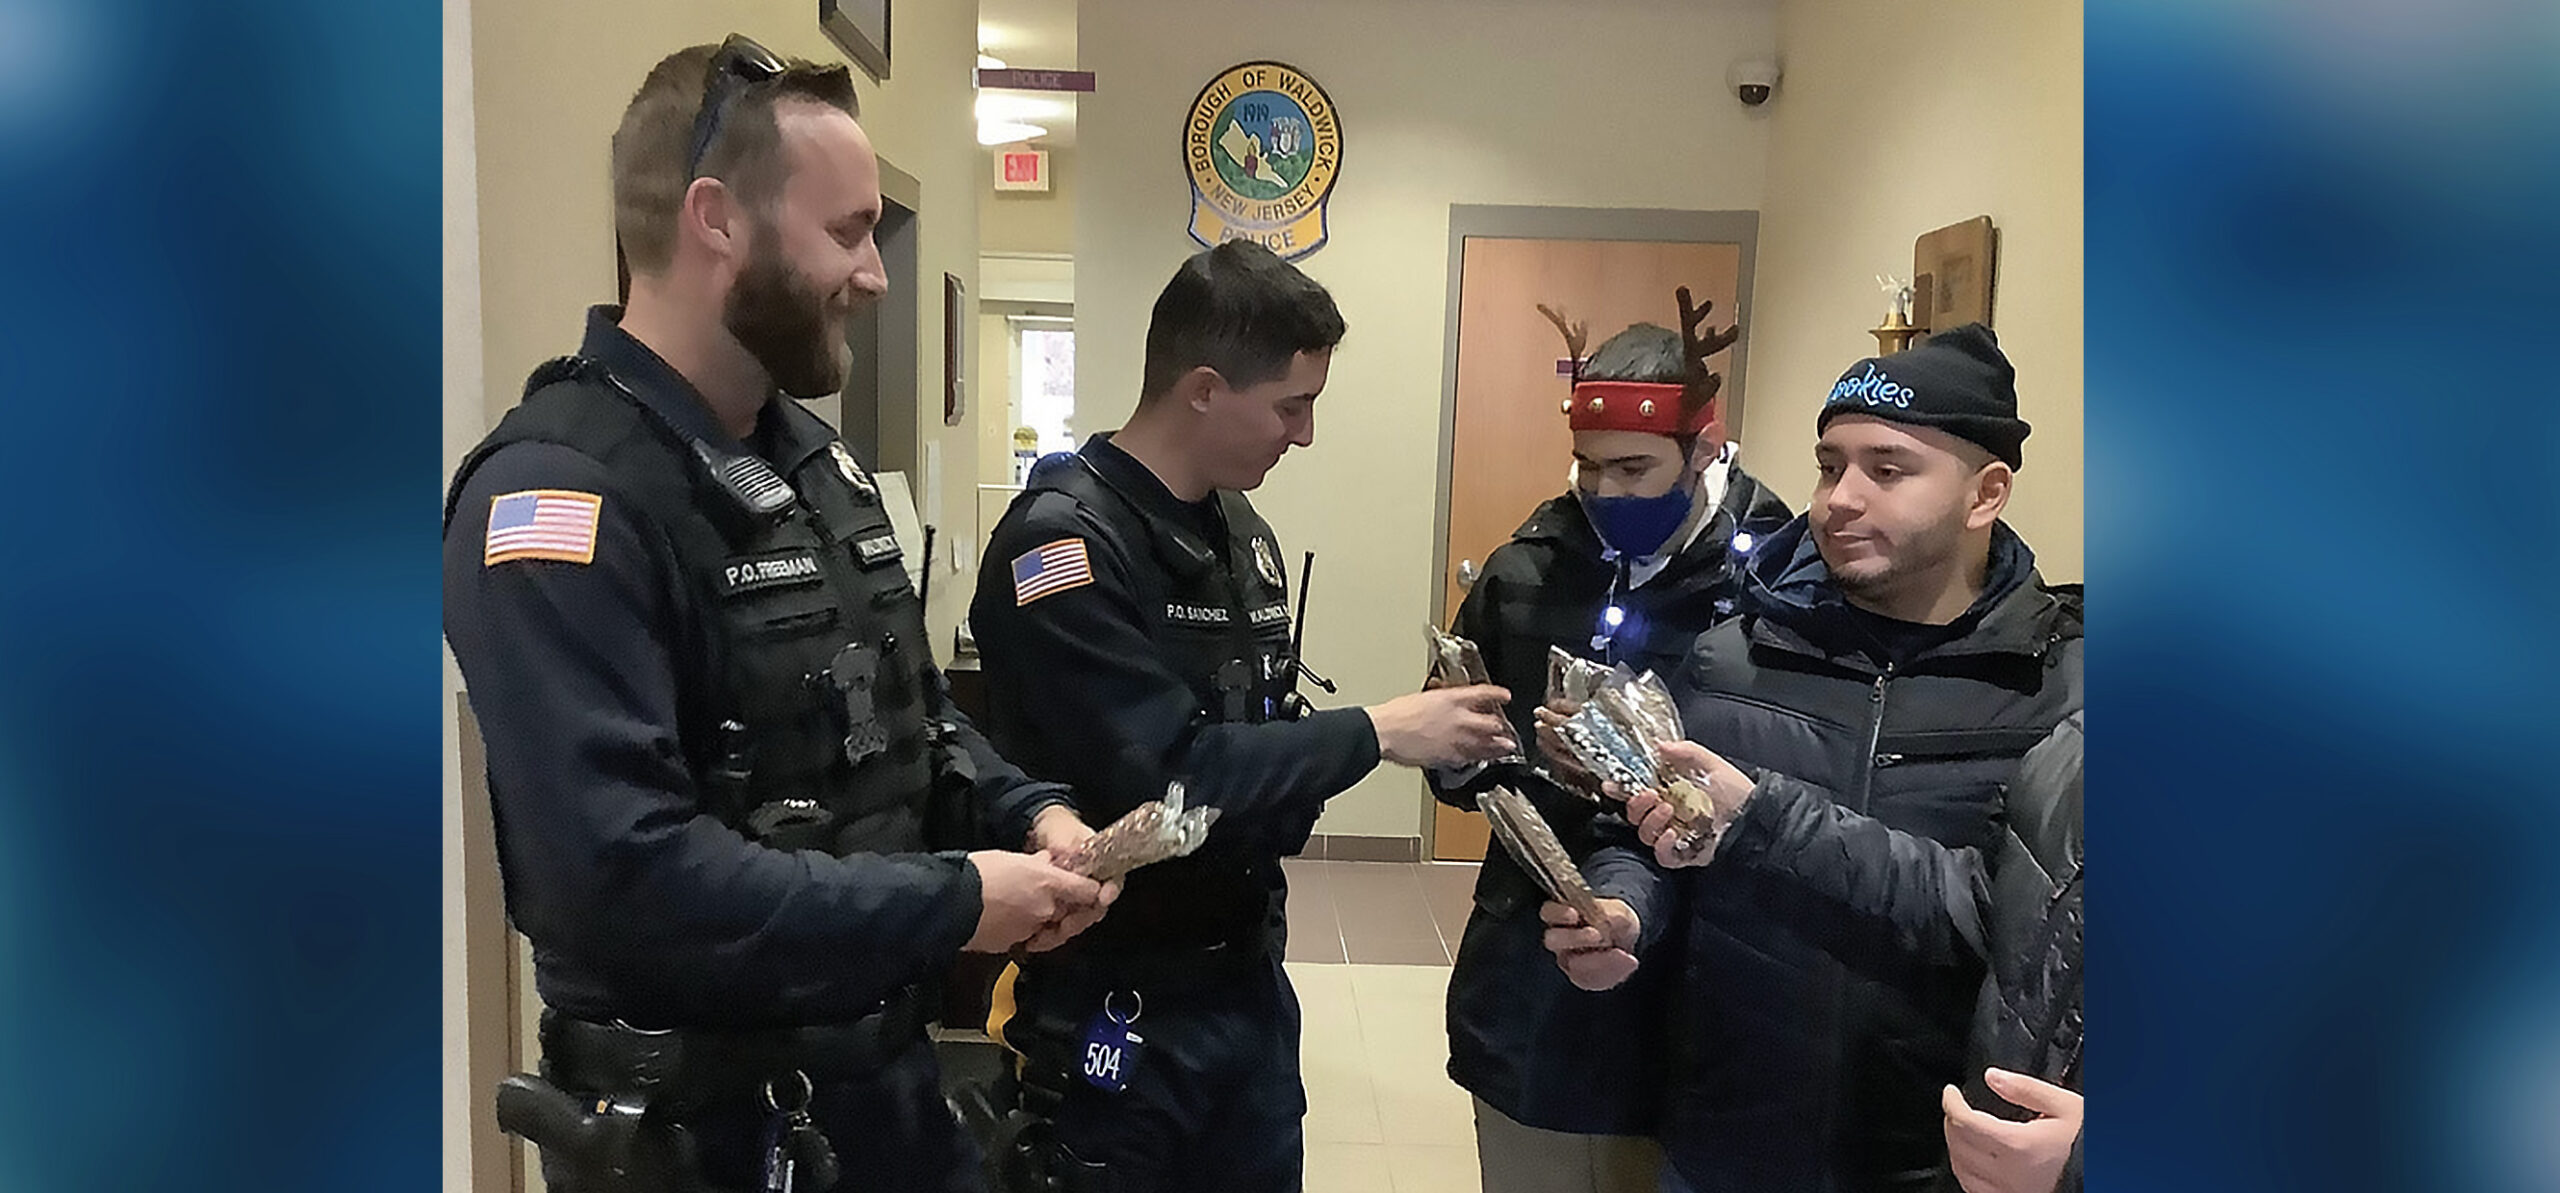 Students in our ELITE program made and delivered delicious chocolate covered pretzels to the Waldwick Police Department.